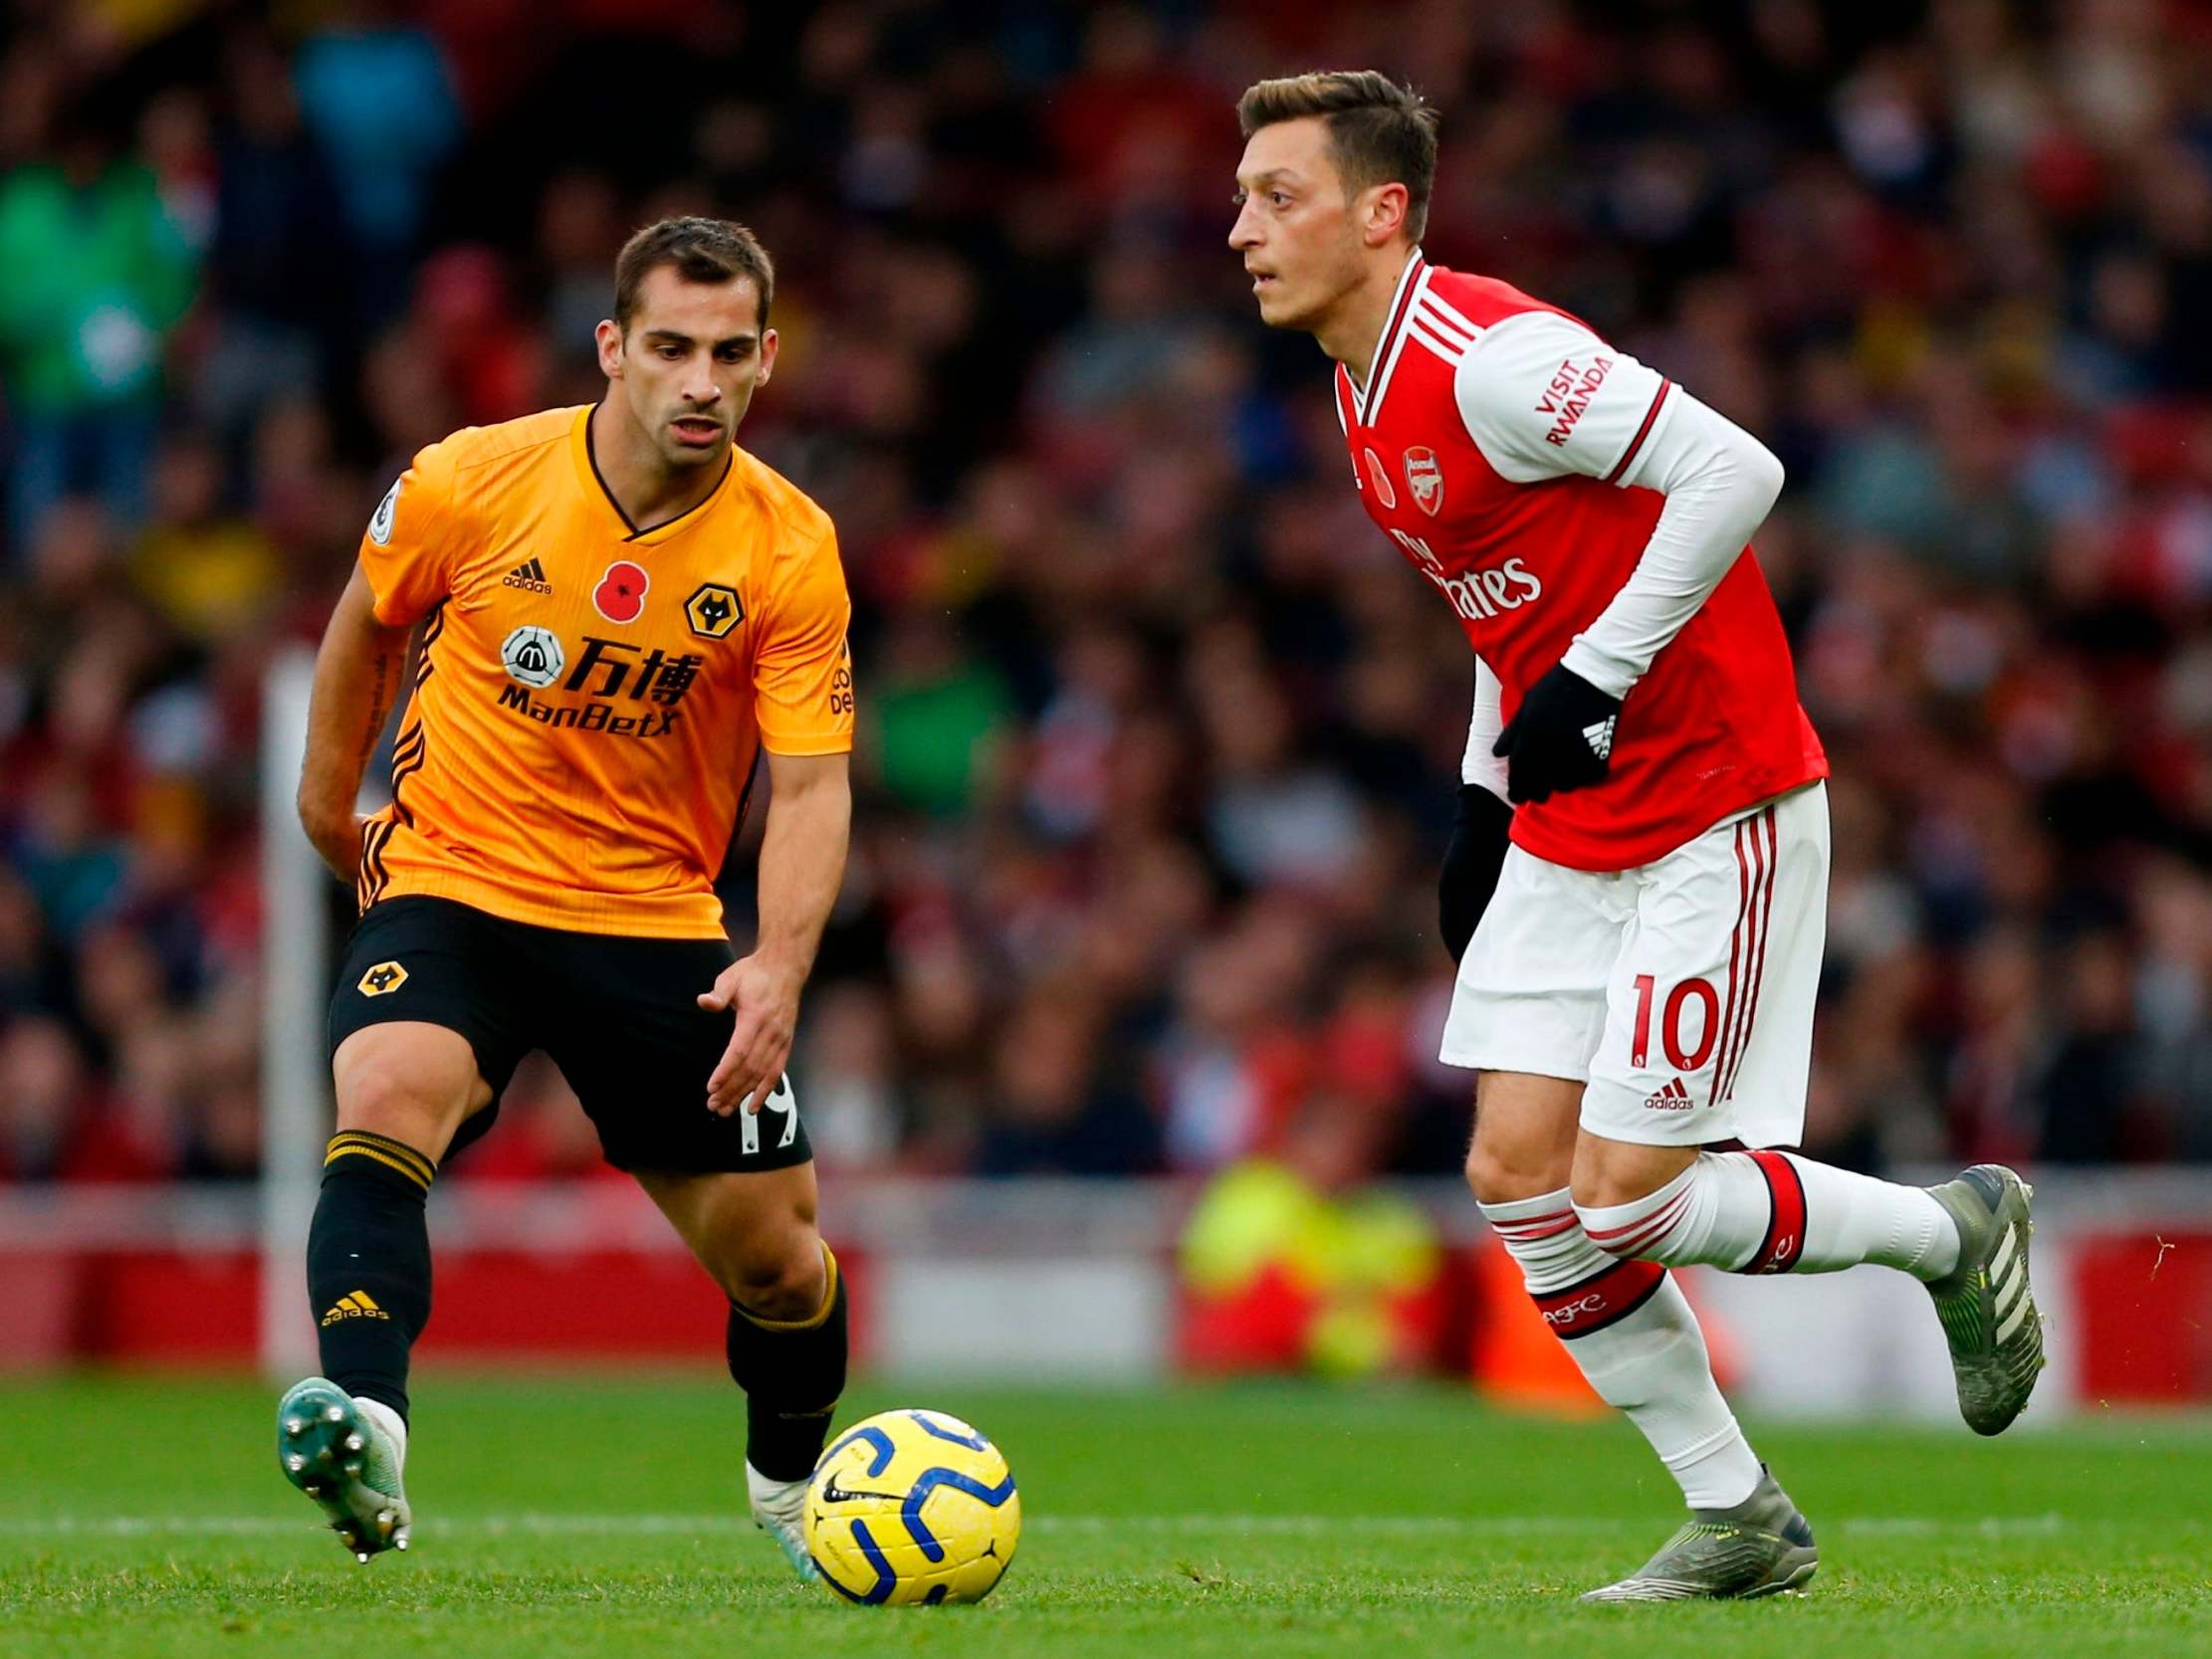 Arsenal vs Wolves LIVE: Latest score, goals and updates from Premier